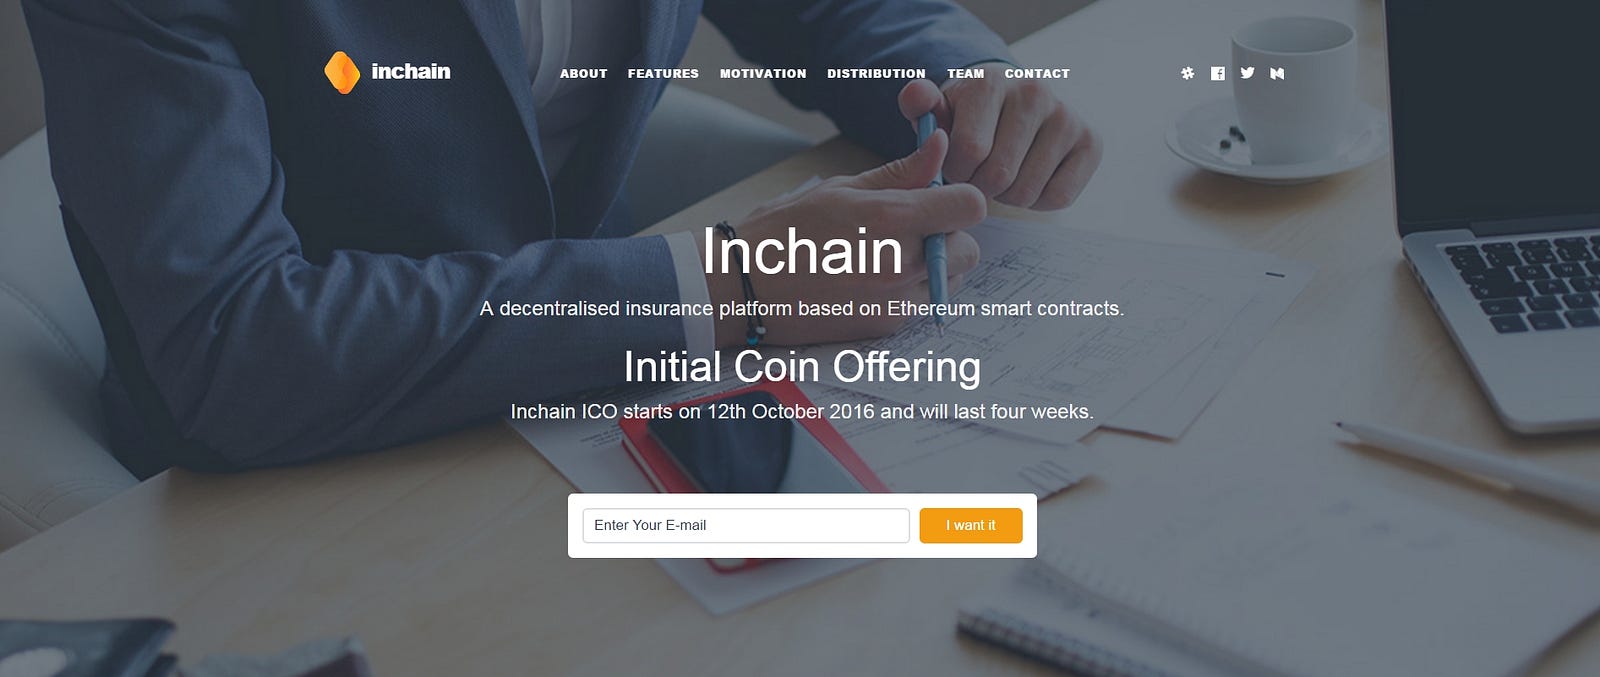 What the Hell Is an Initial Coin Offering?